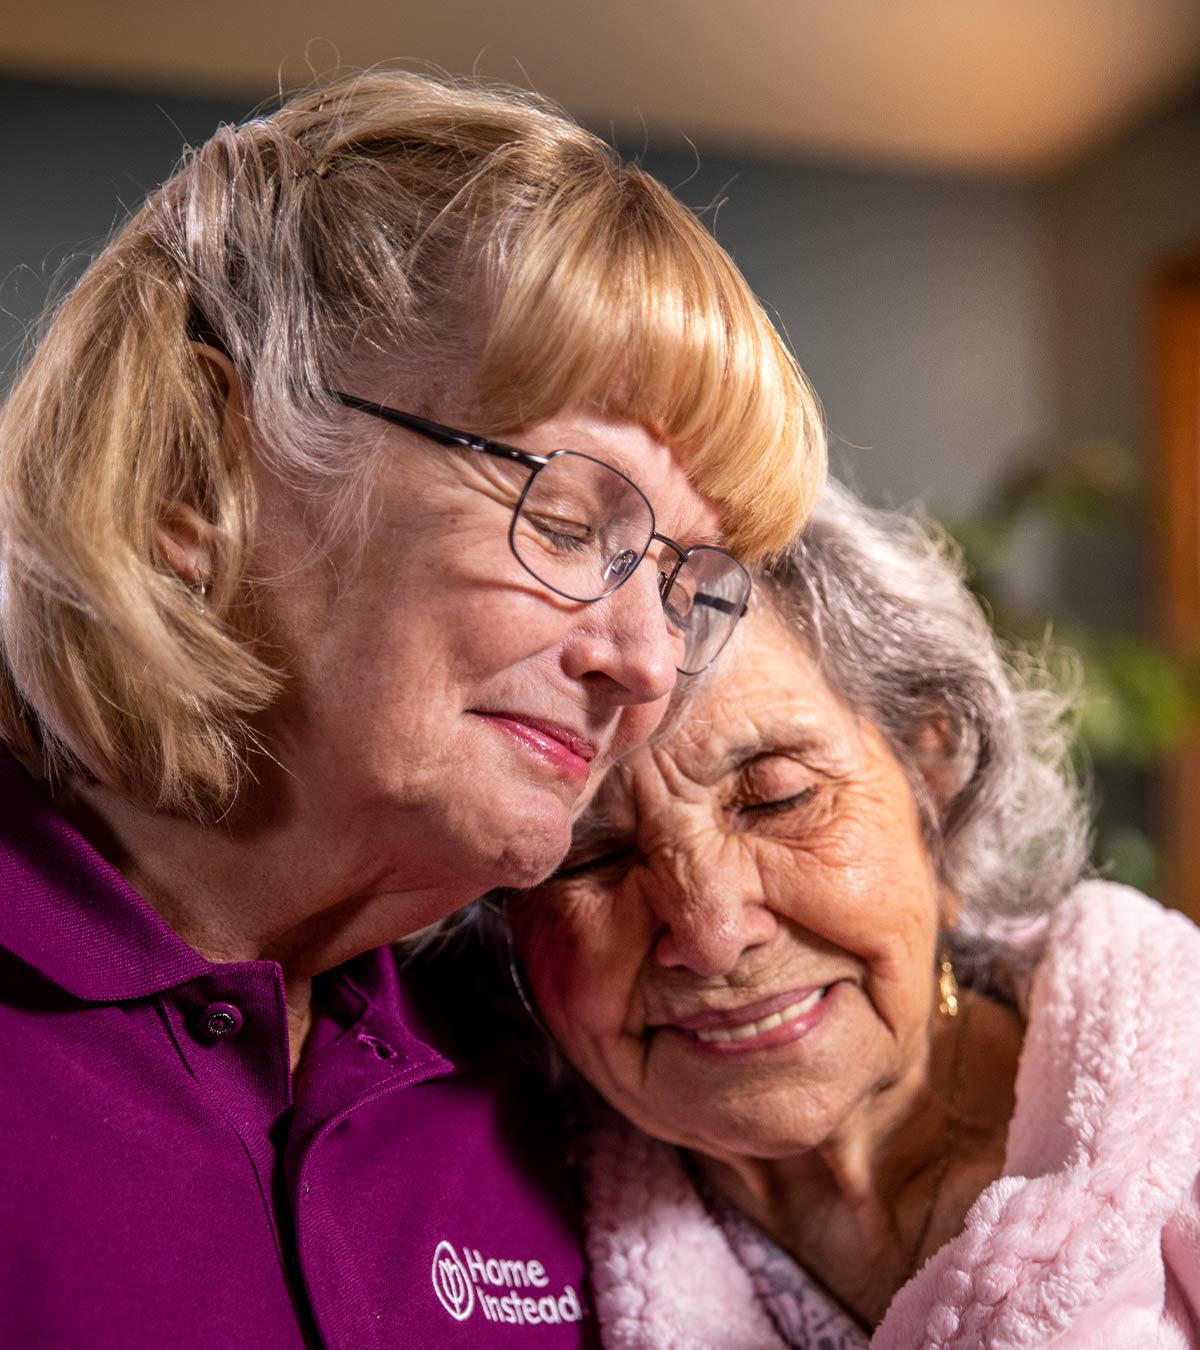 CAREGiver providing in-home senior care services. Home Instead of Midland, TX provides Elder Care to aging adults. 